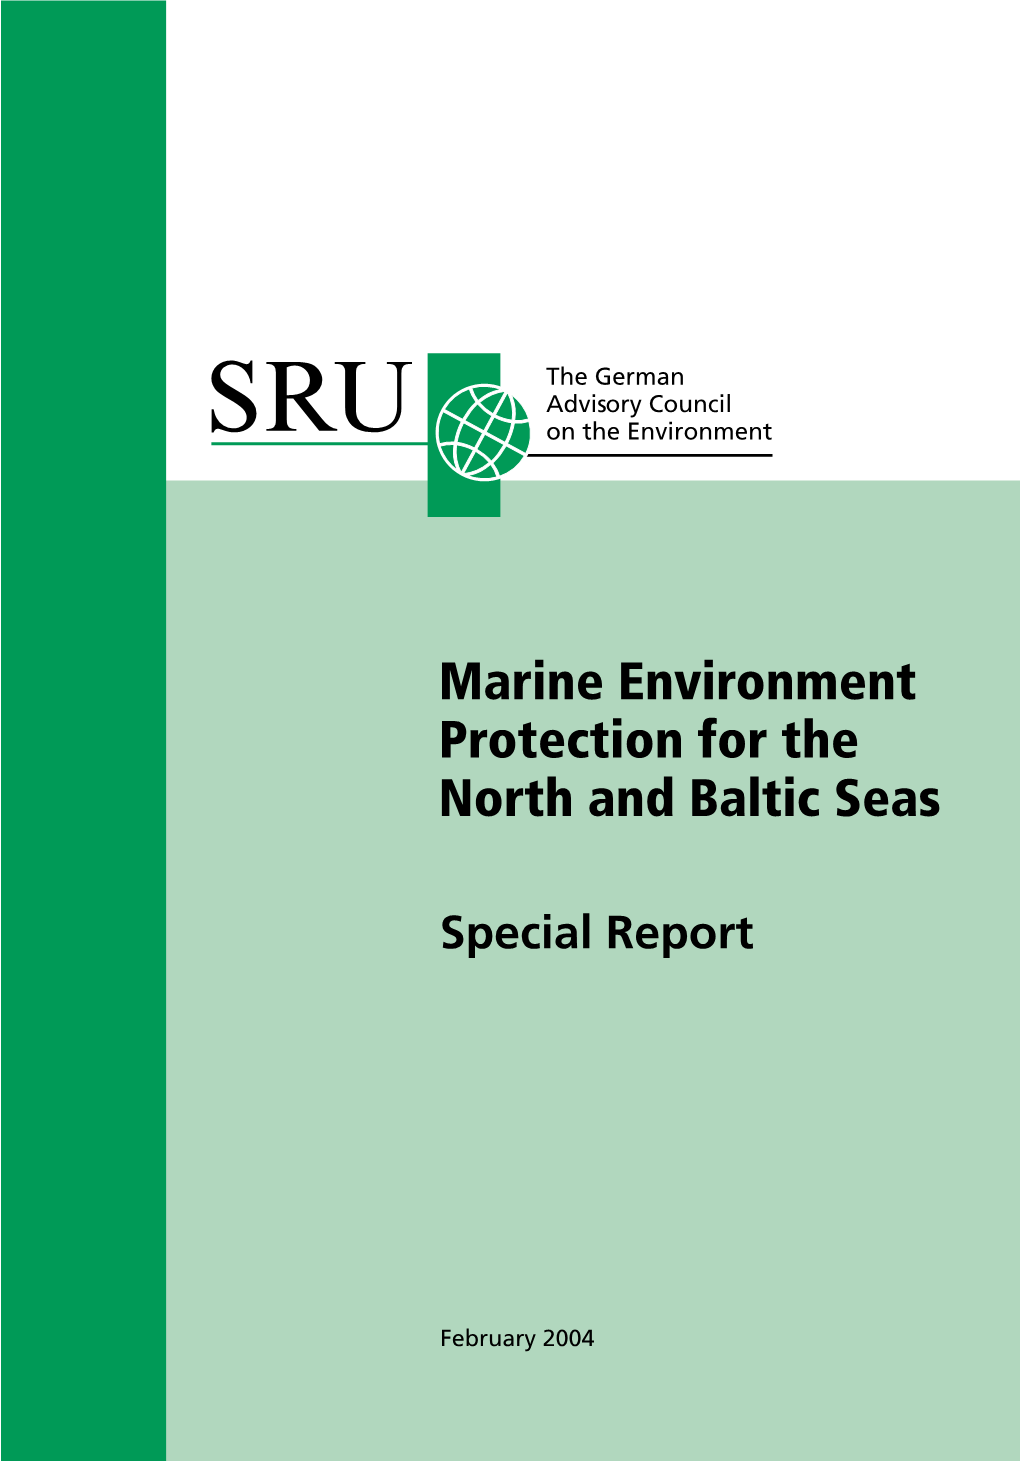 Marine Environment Protection for the North and Baltic Seas